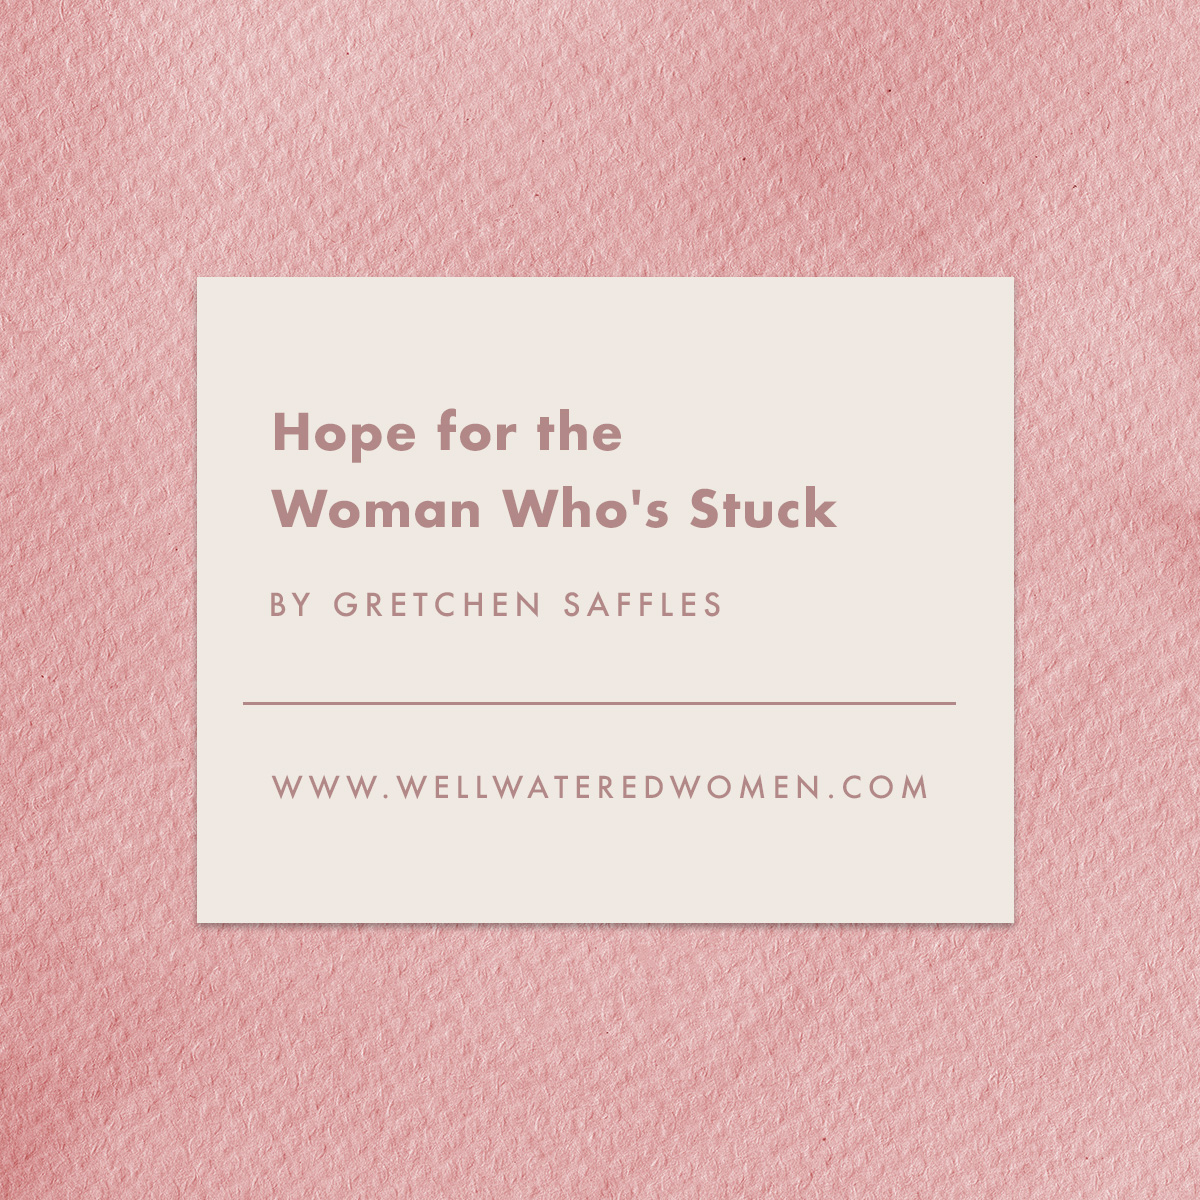 Hope for the Woman Who’s Stuck